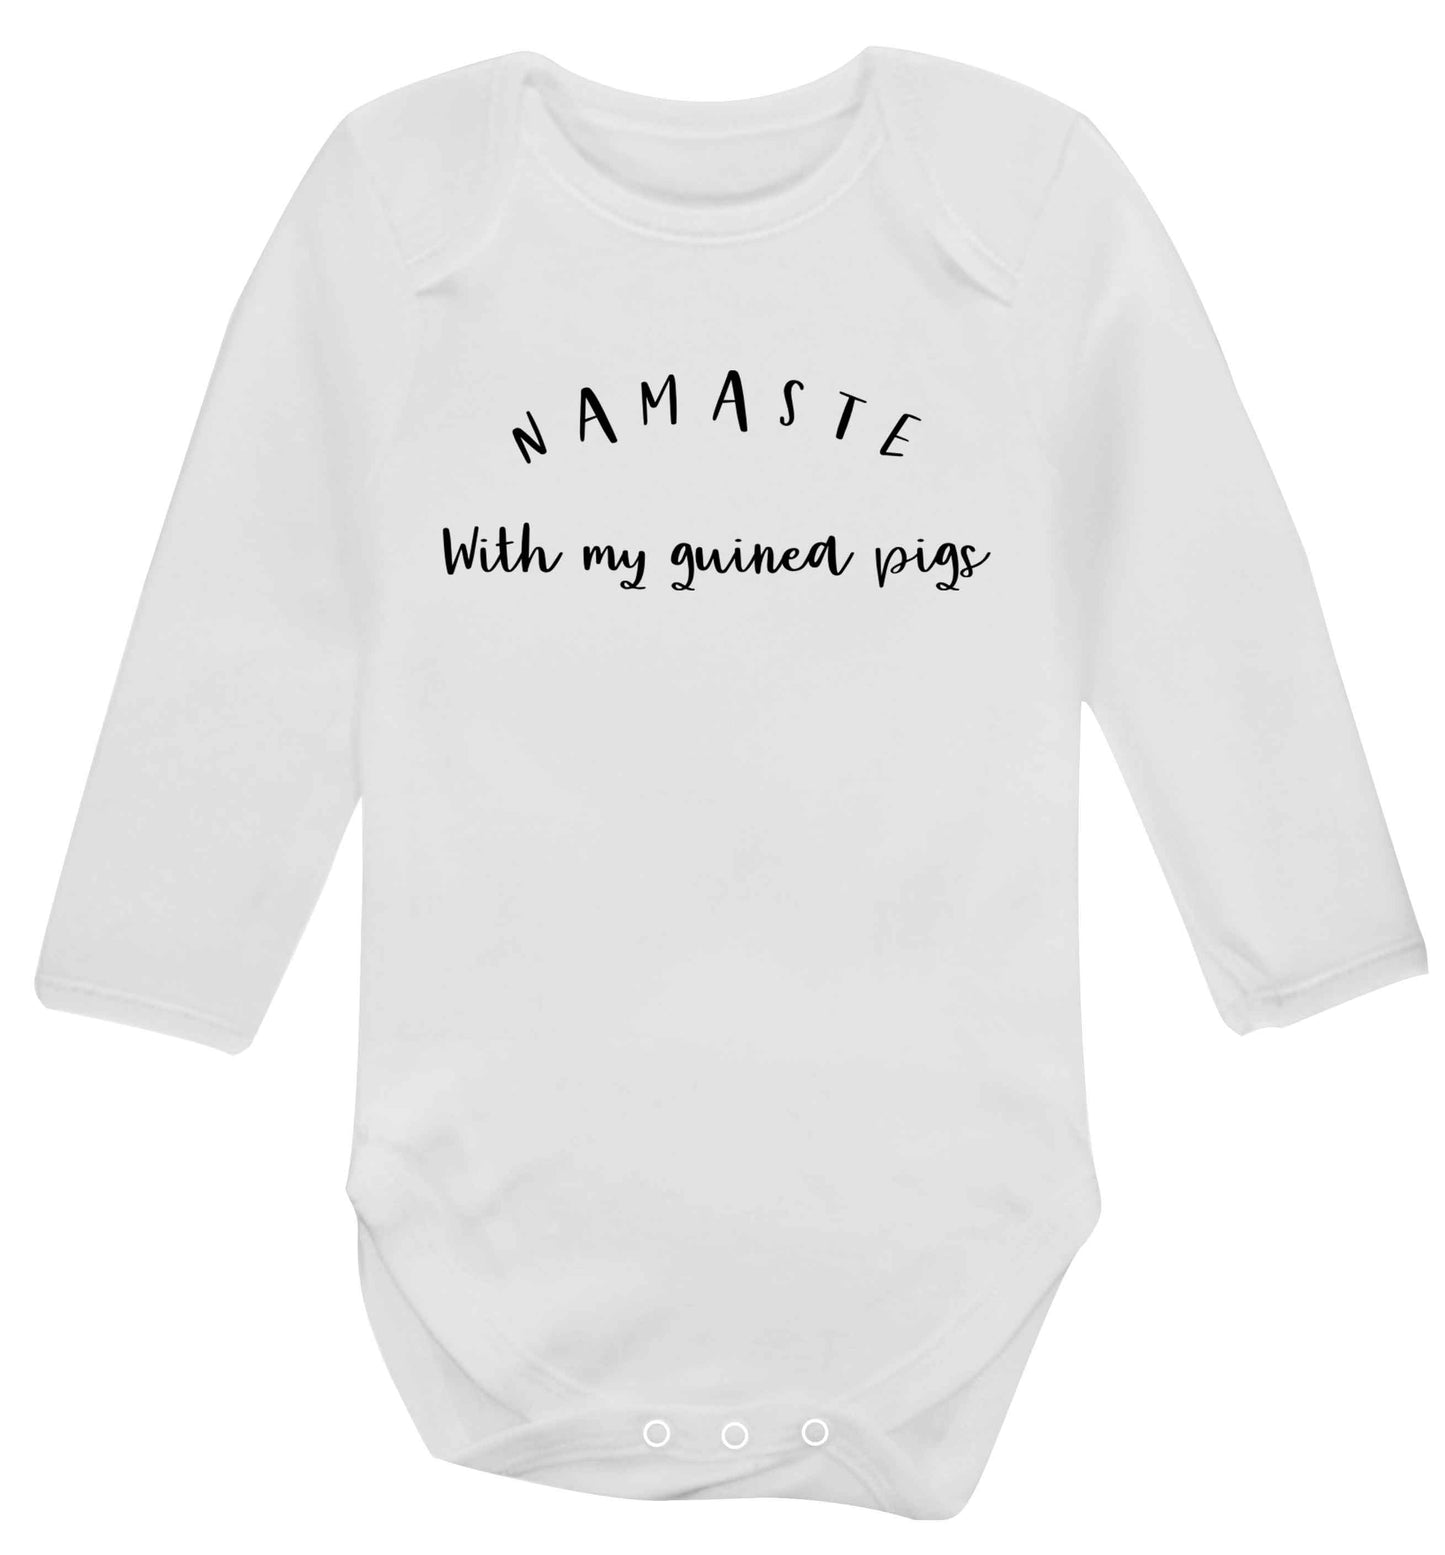 Namaste with my guinea pigs Baby Vest long sleeved white 6-12 months